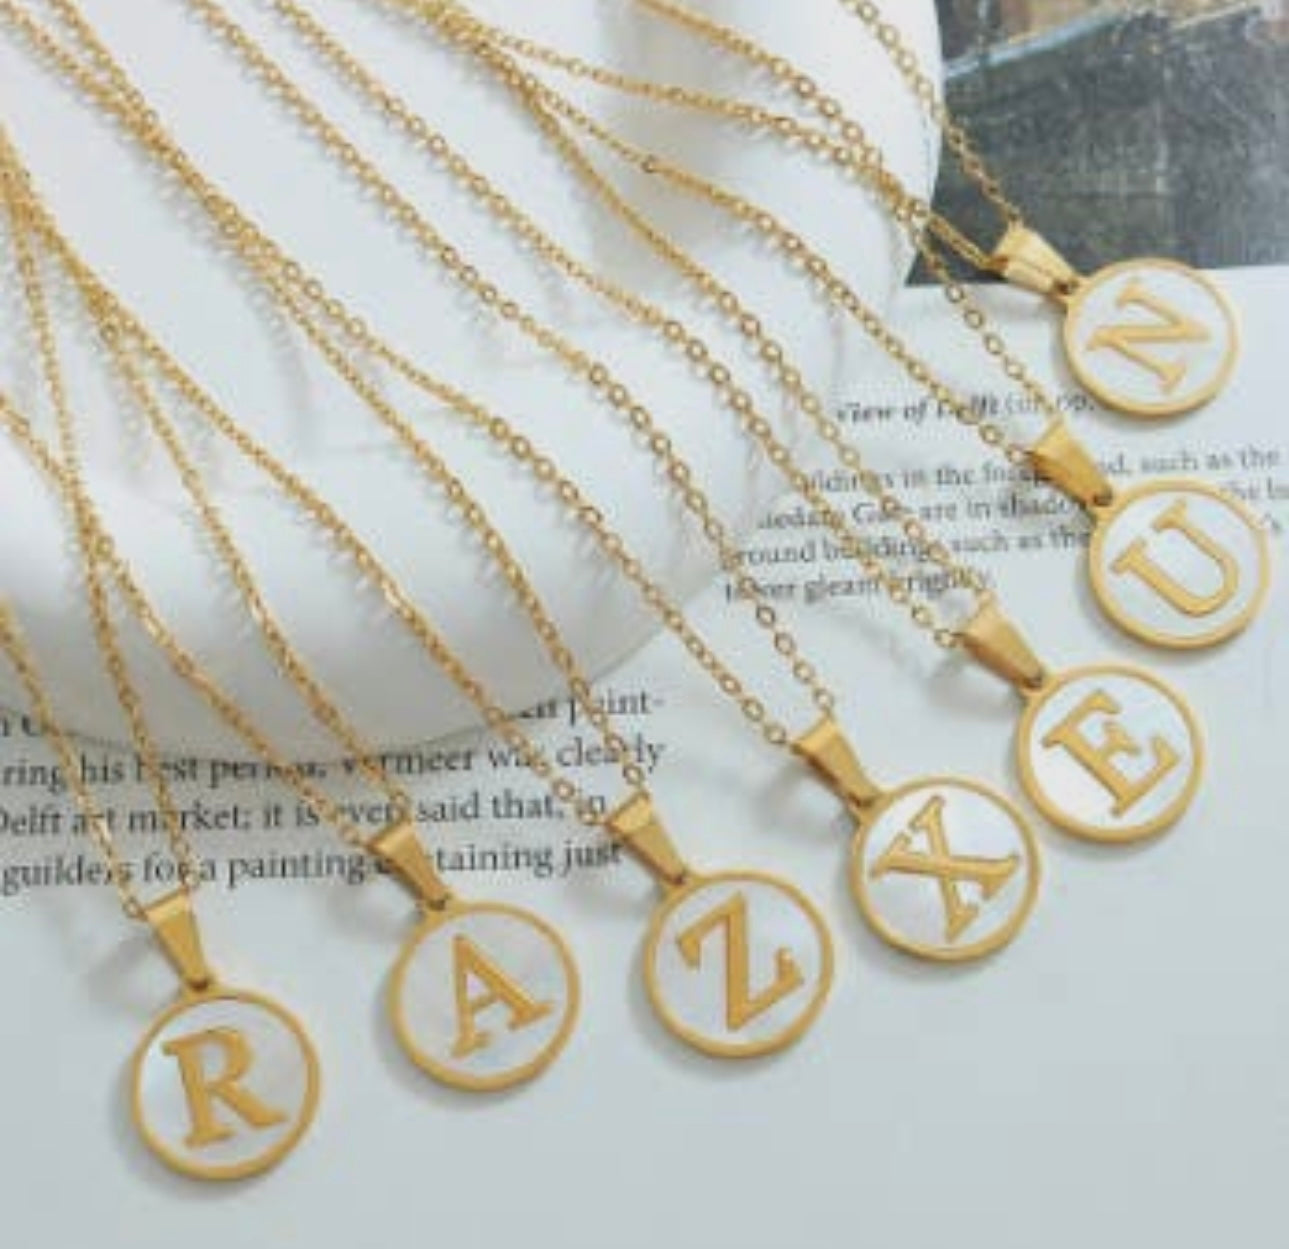 3S INITIAL NECKLACE